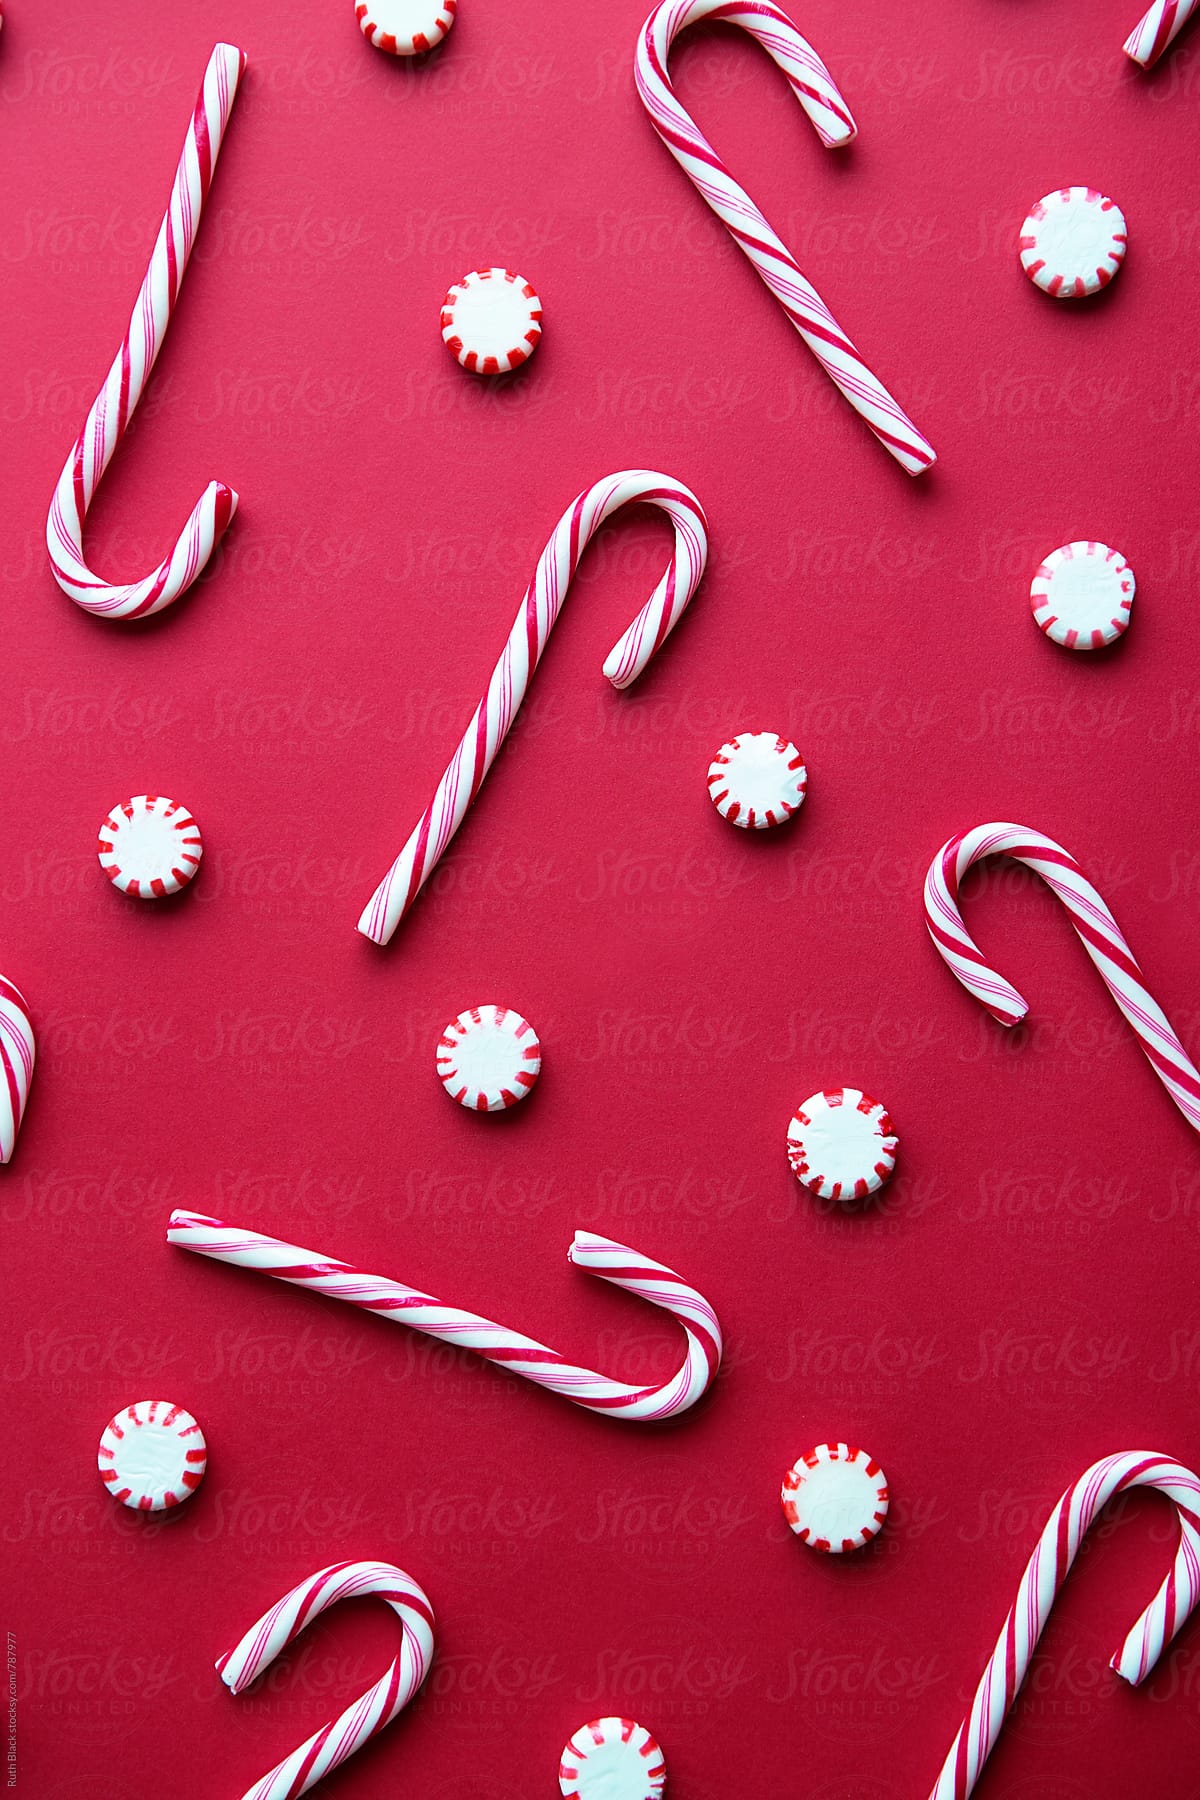 Candy Cane Background